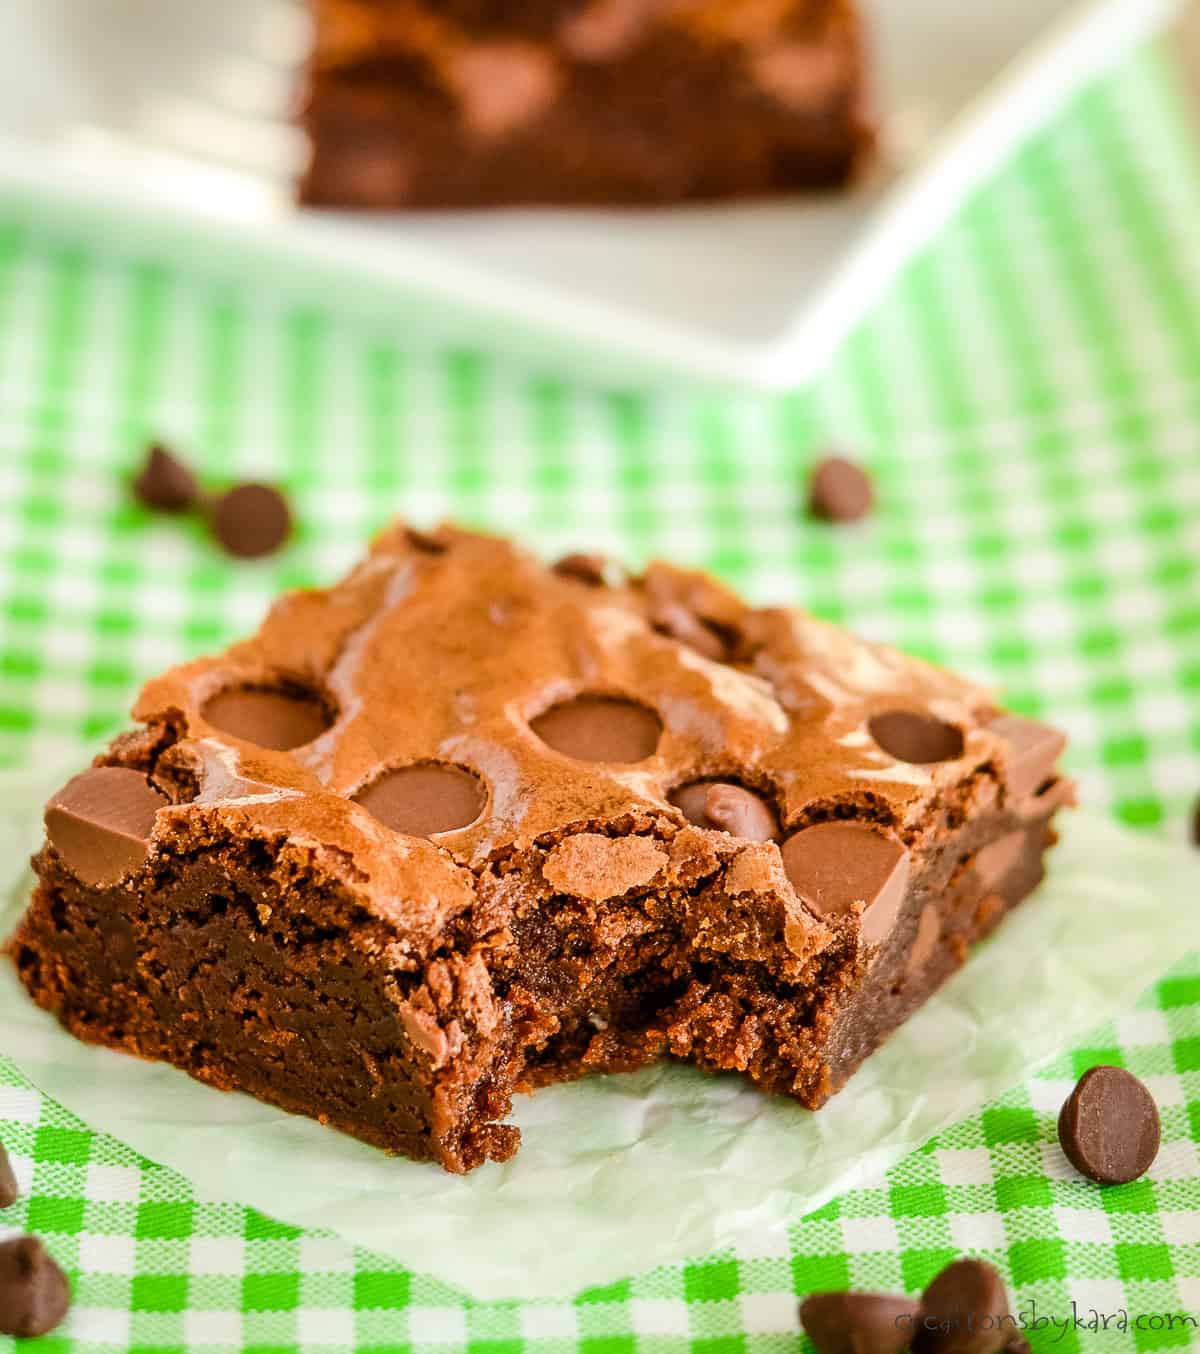 close up of chocolate chip brownie with a bite taken out of it